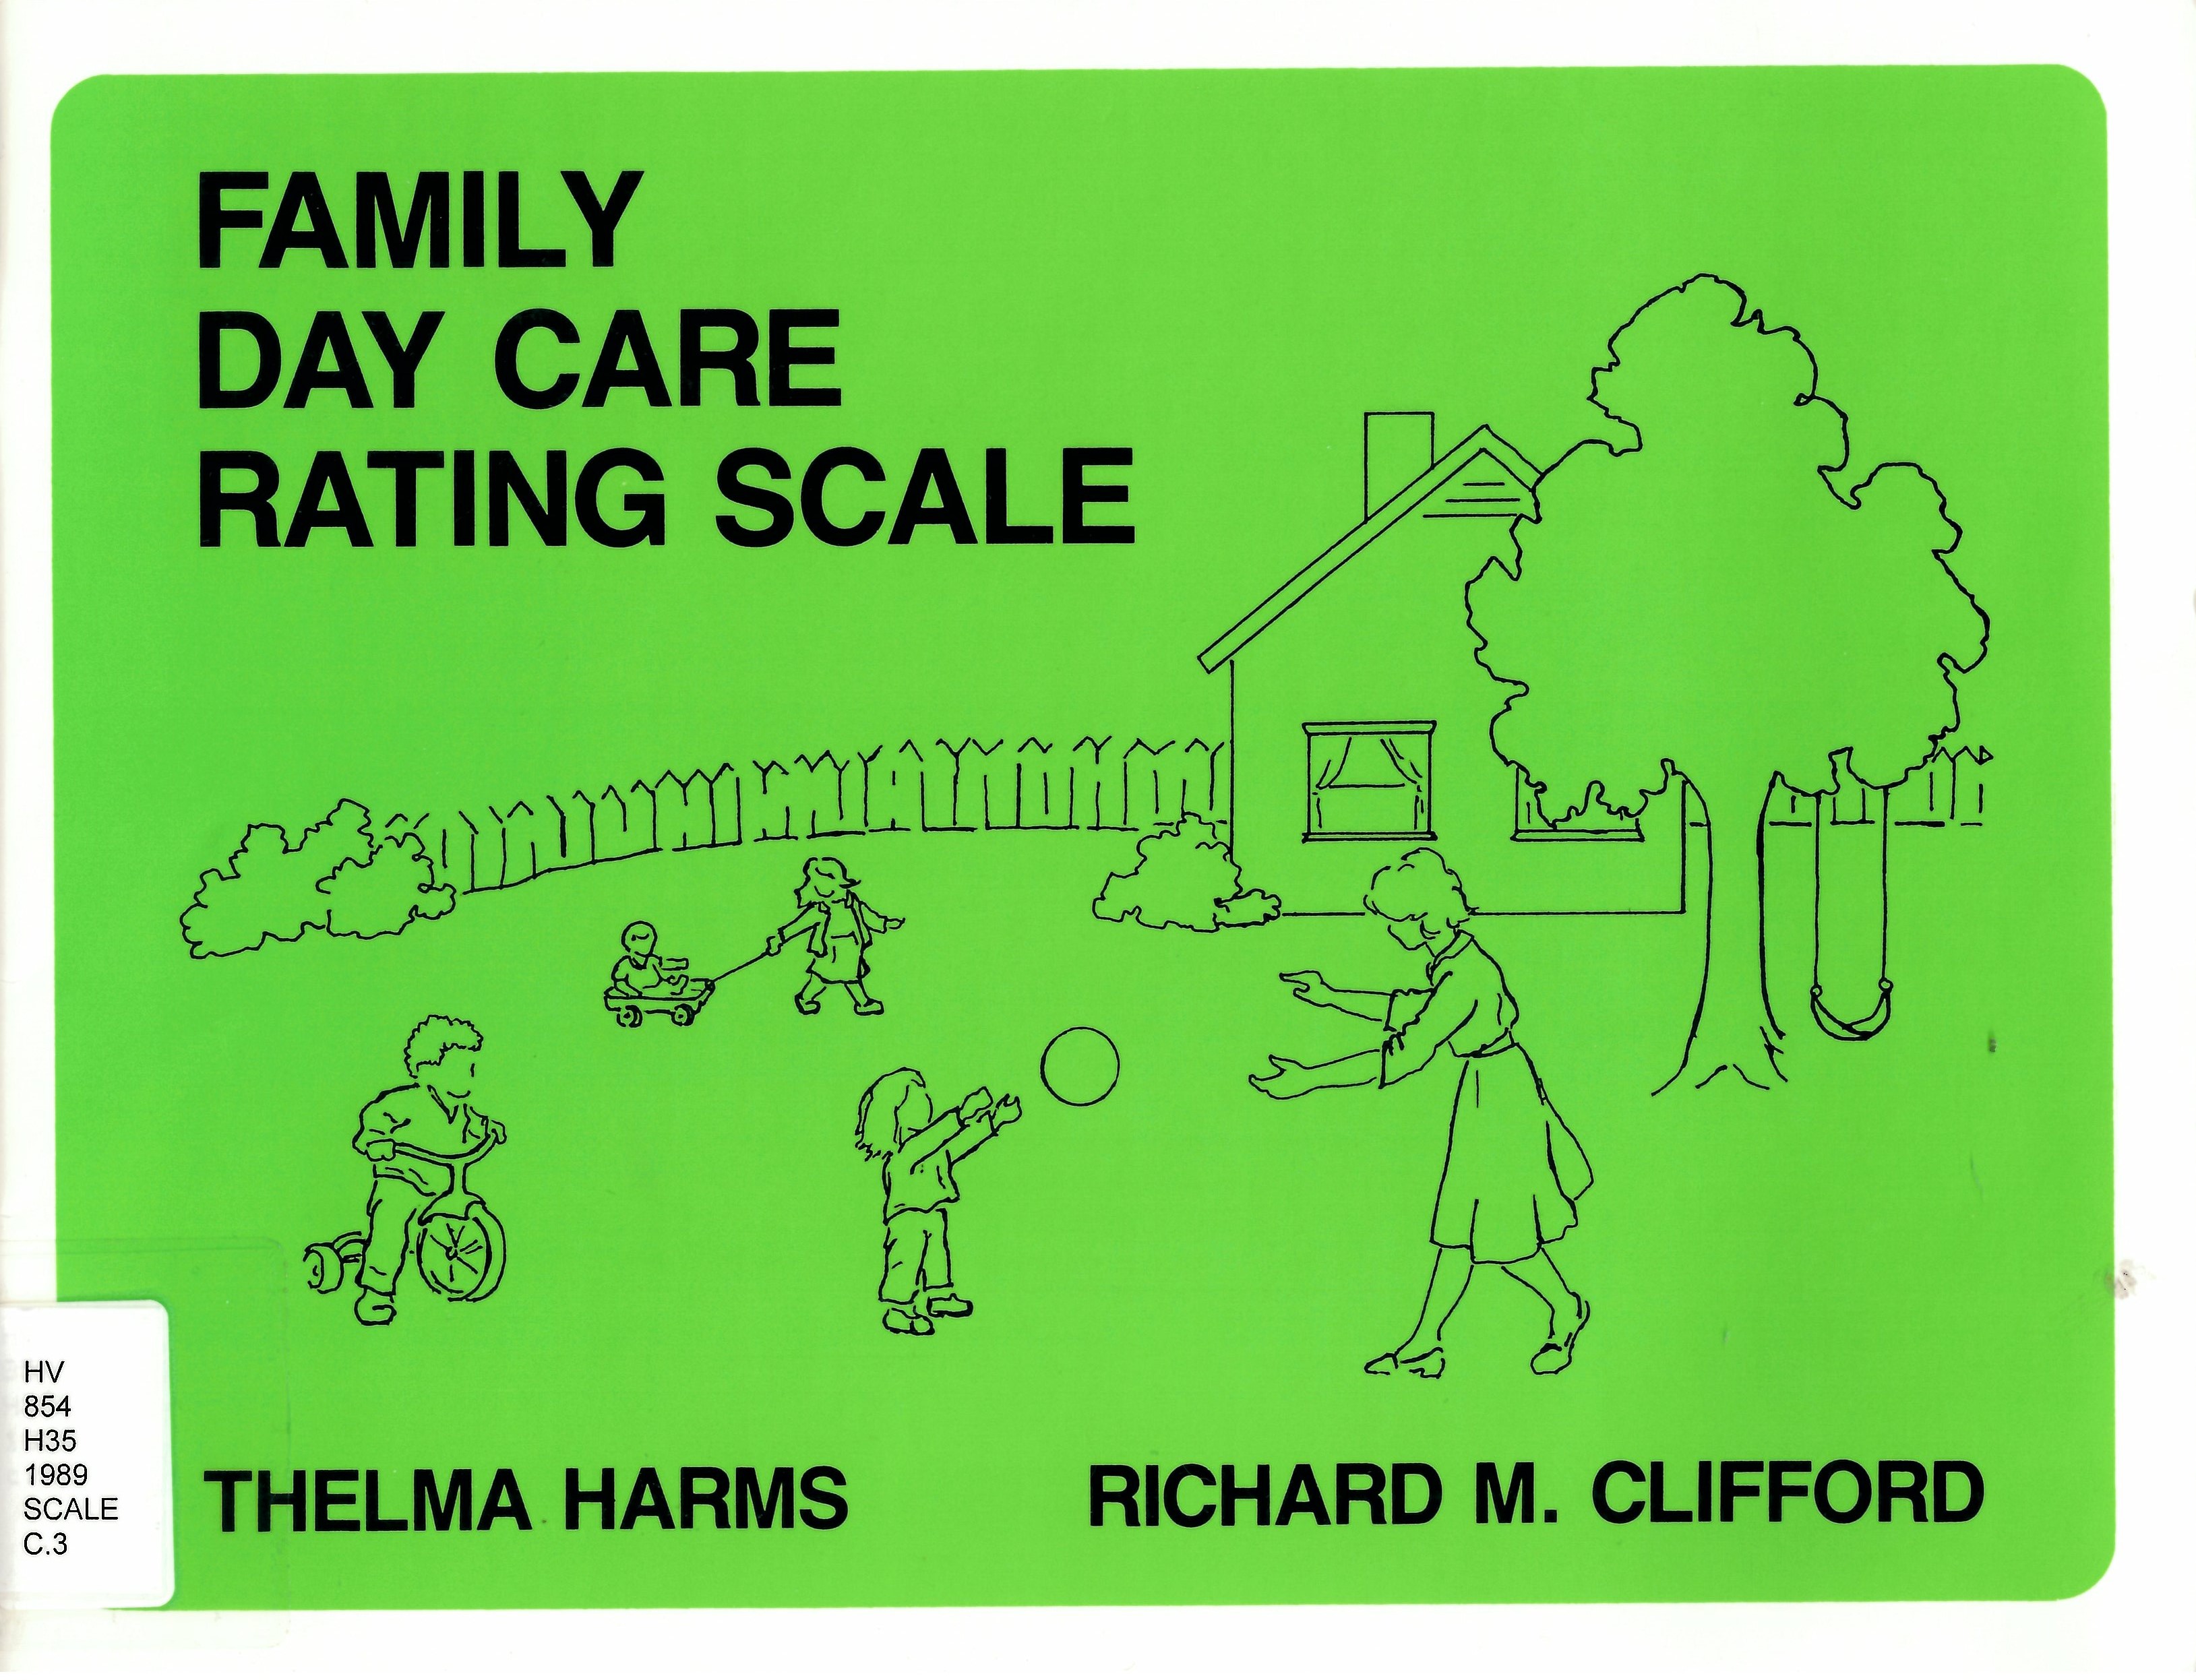 Video observations for the family day care rating scale